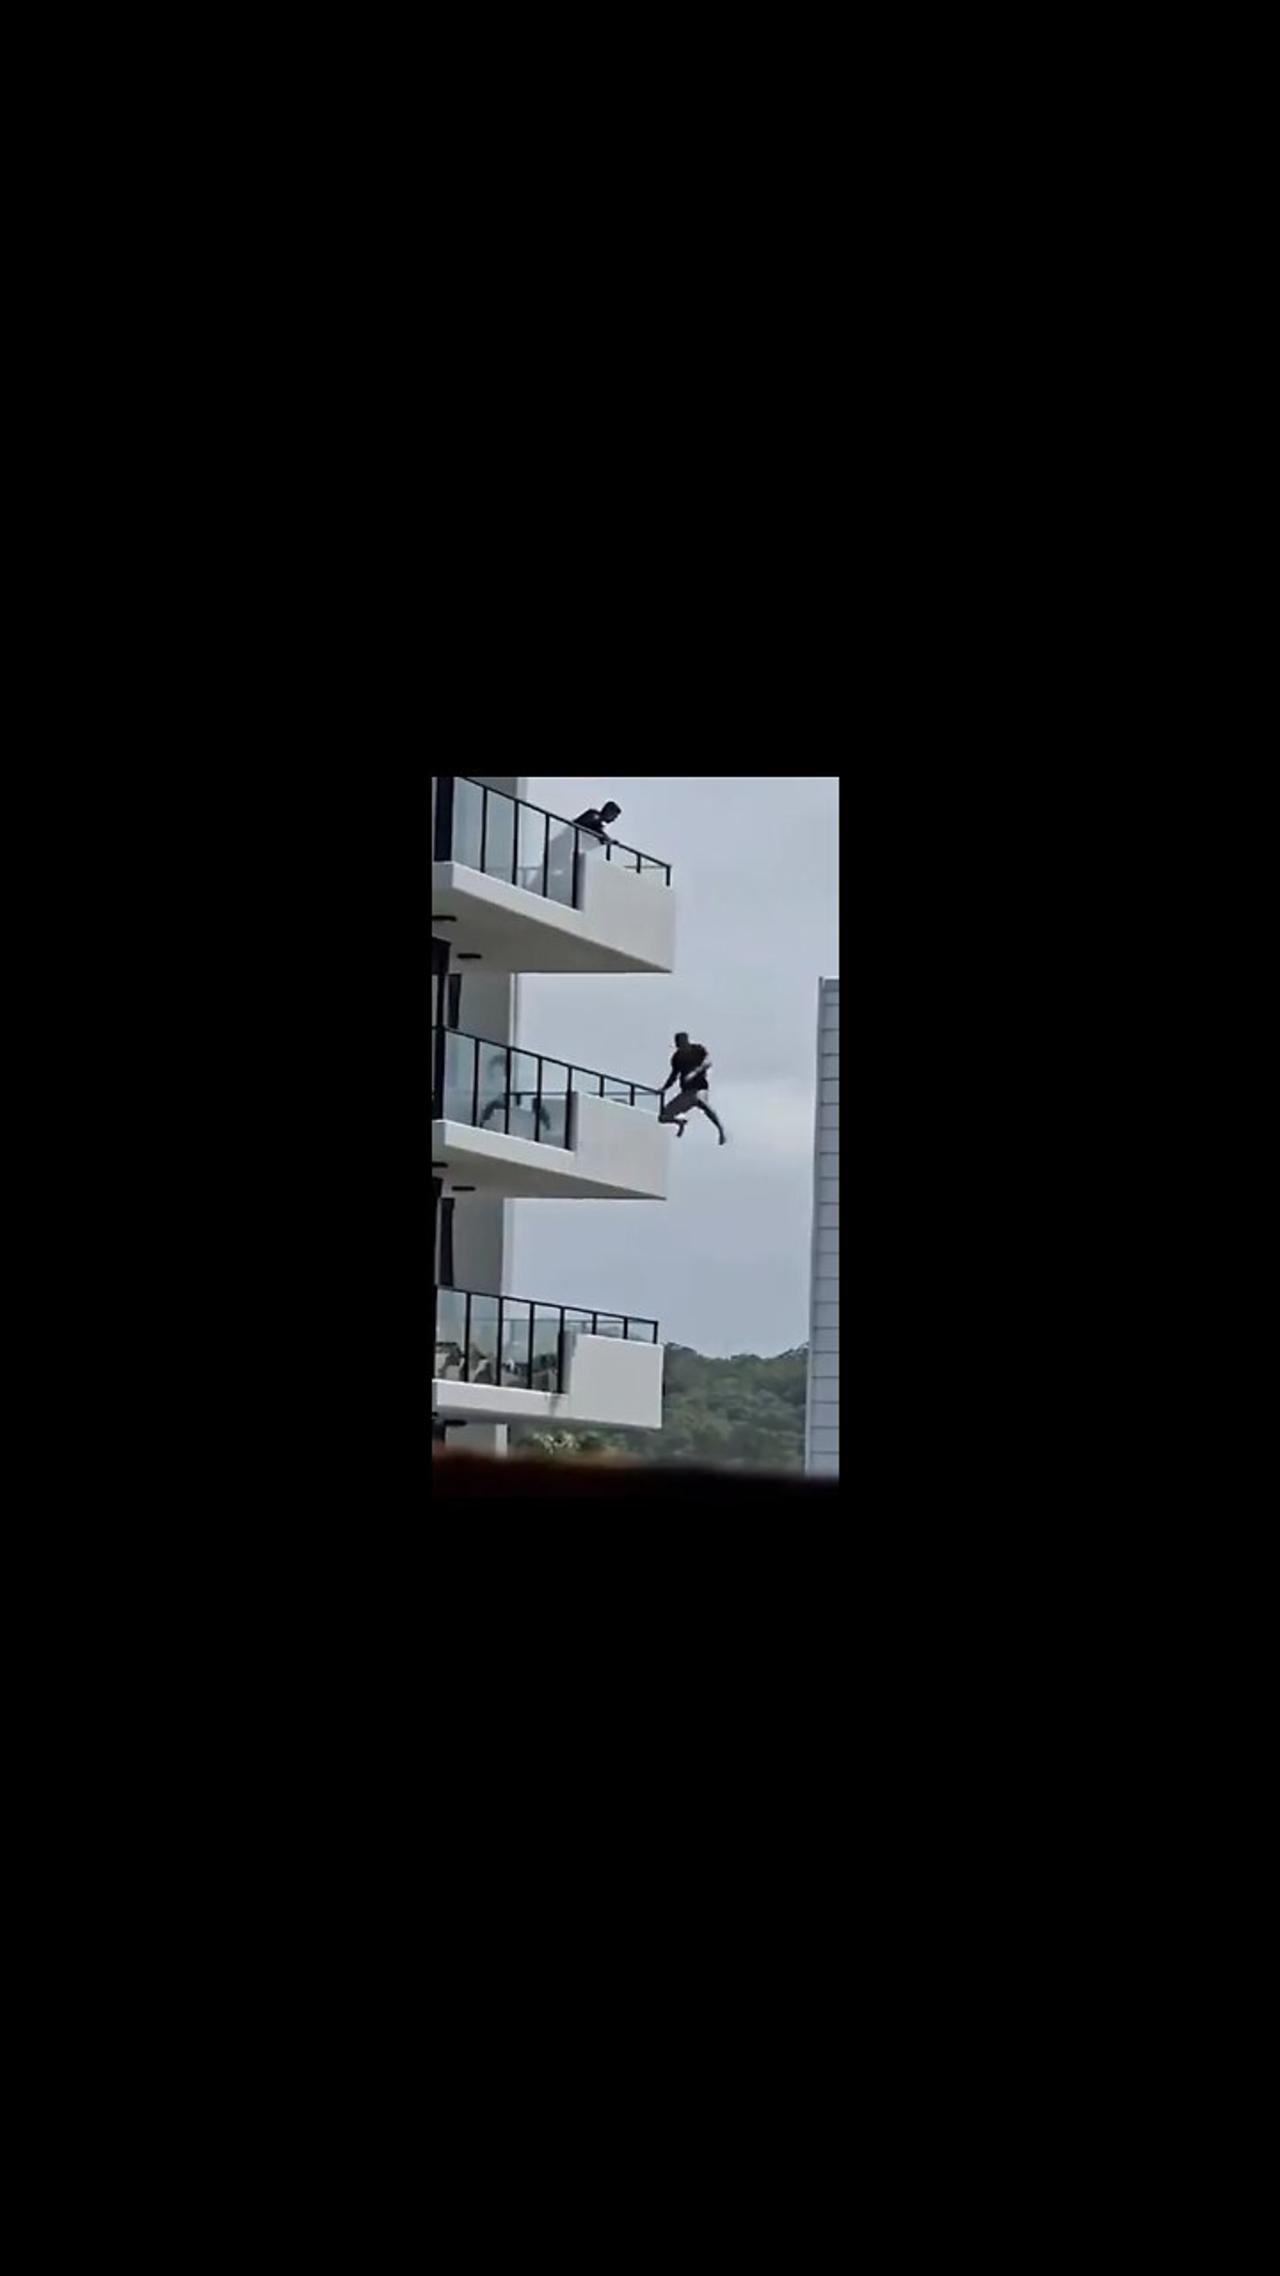 Man Jumps From 5th Floor Into Swimming Pool To Evade Arrest